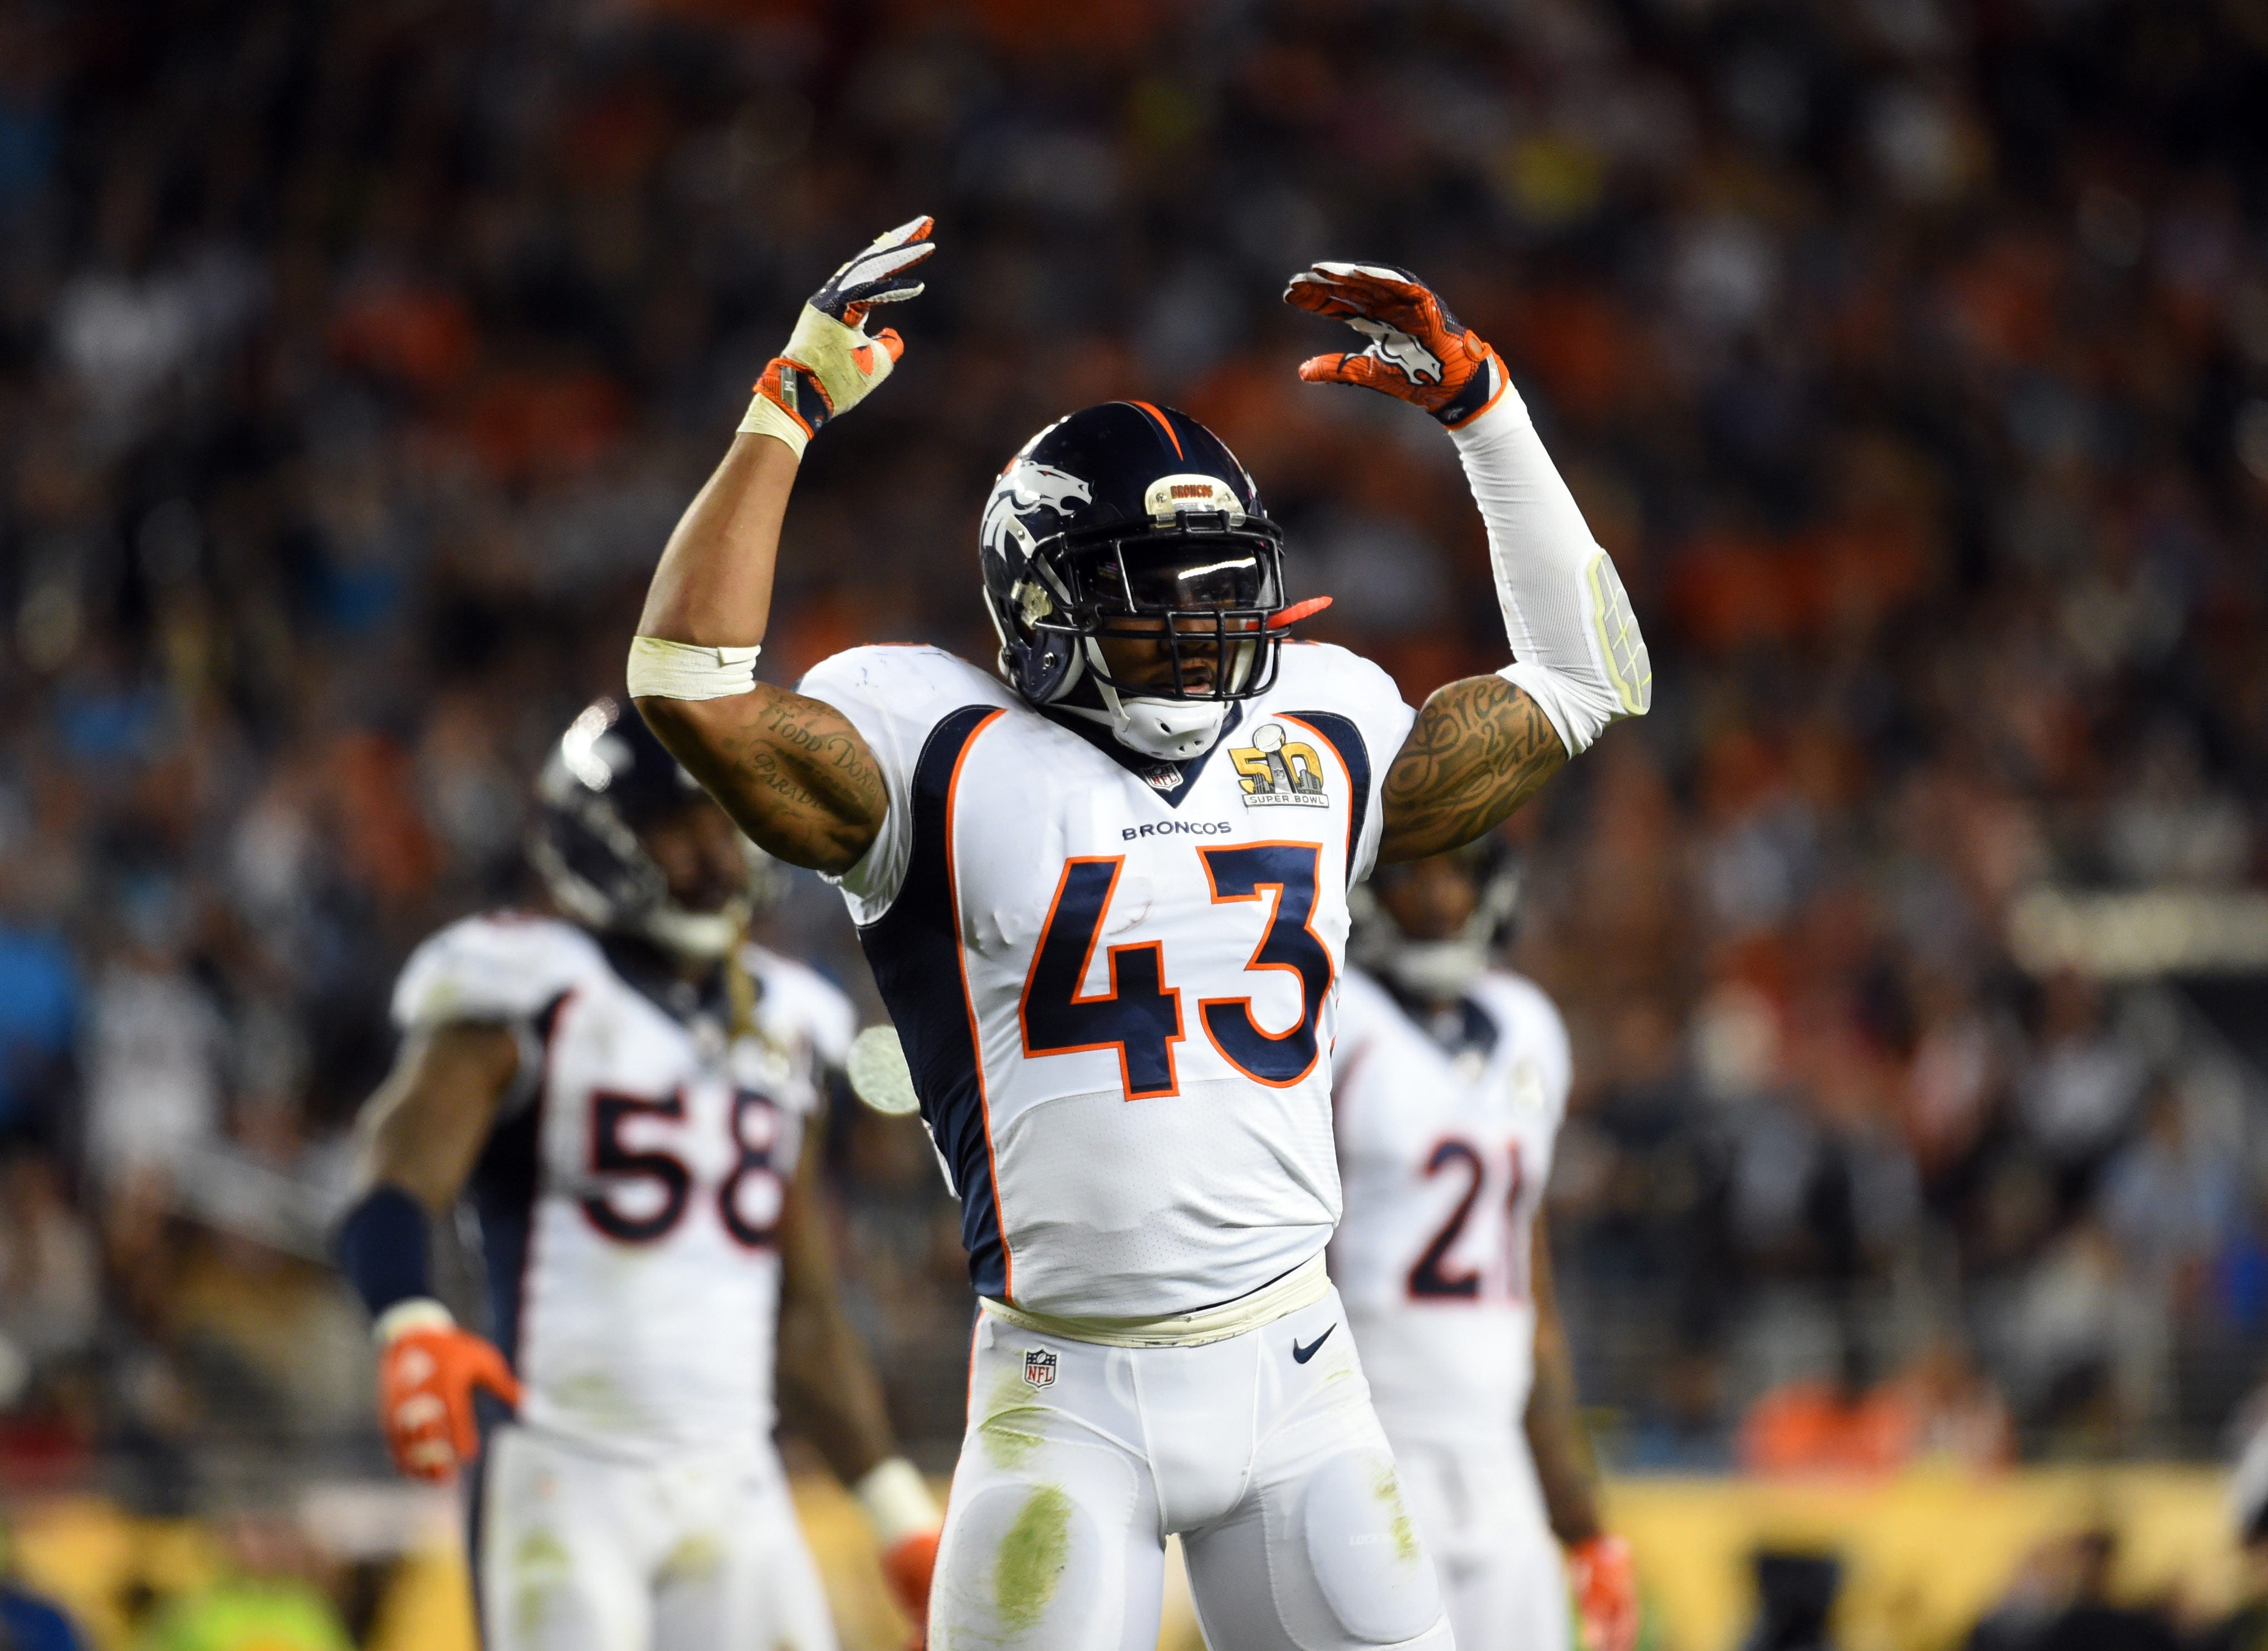 Broncos mock Panthers for flashy ways after Super Bowl win